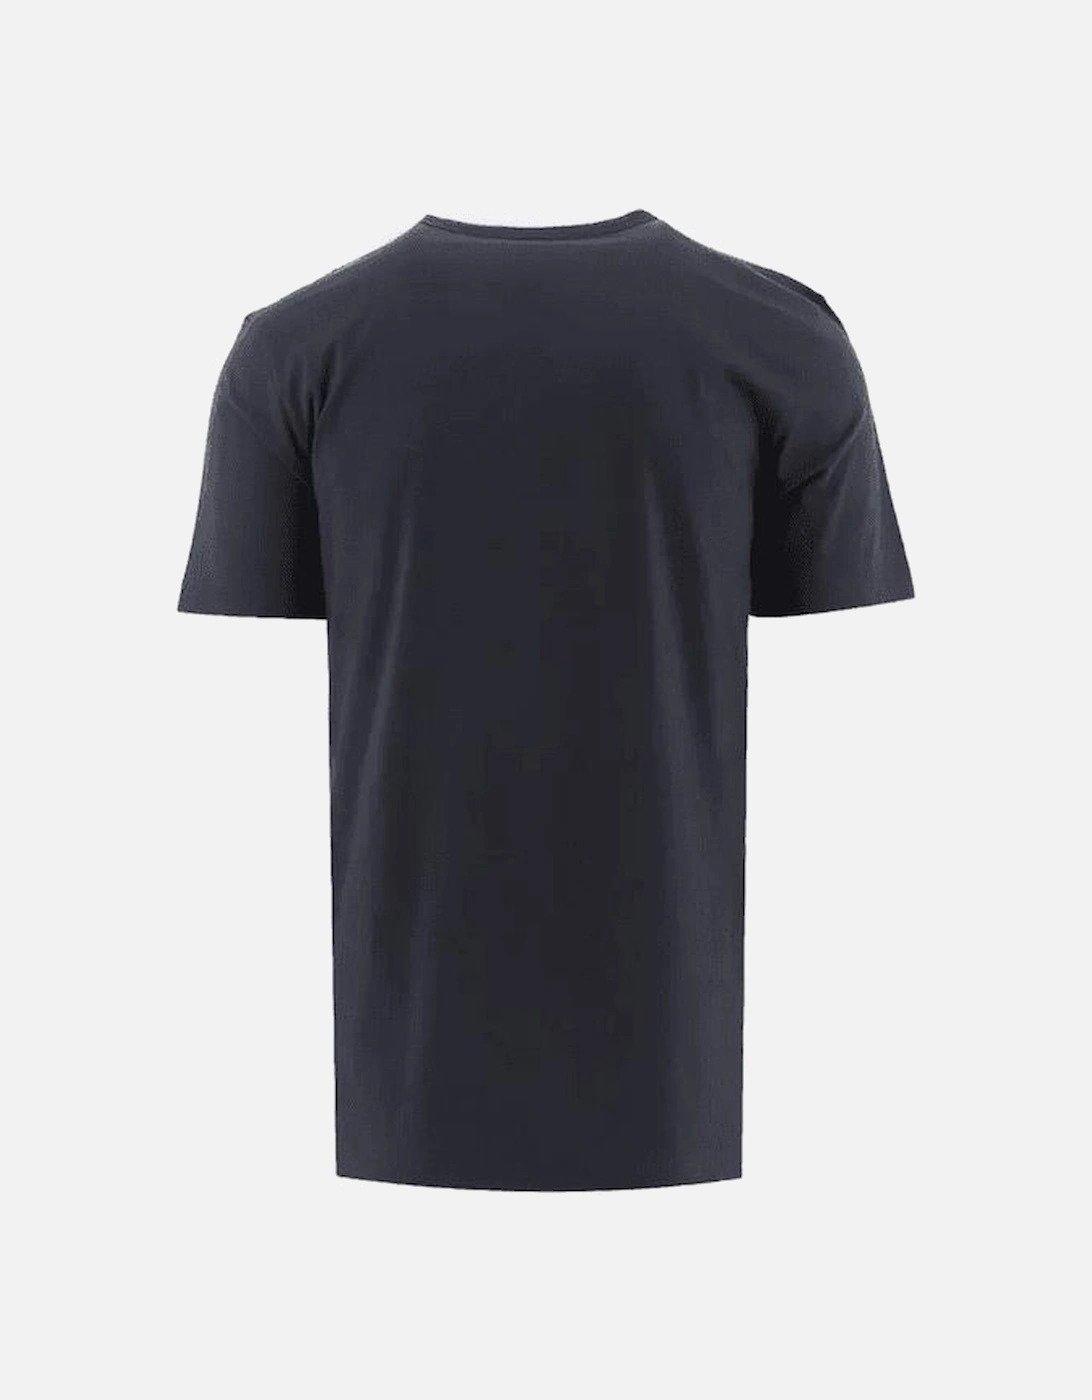 Cotton Curved Rubber Logo Navy T-Shirt